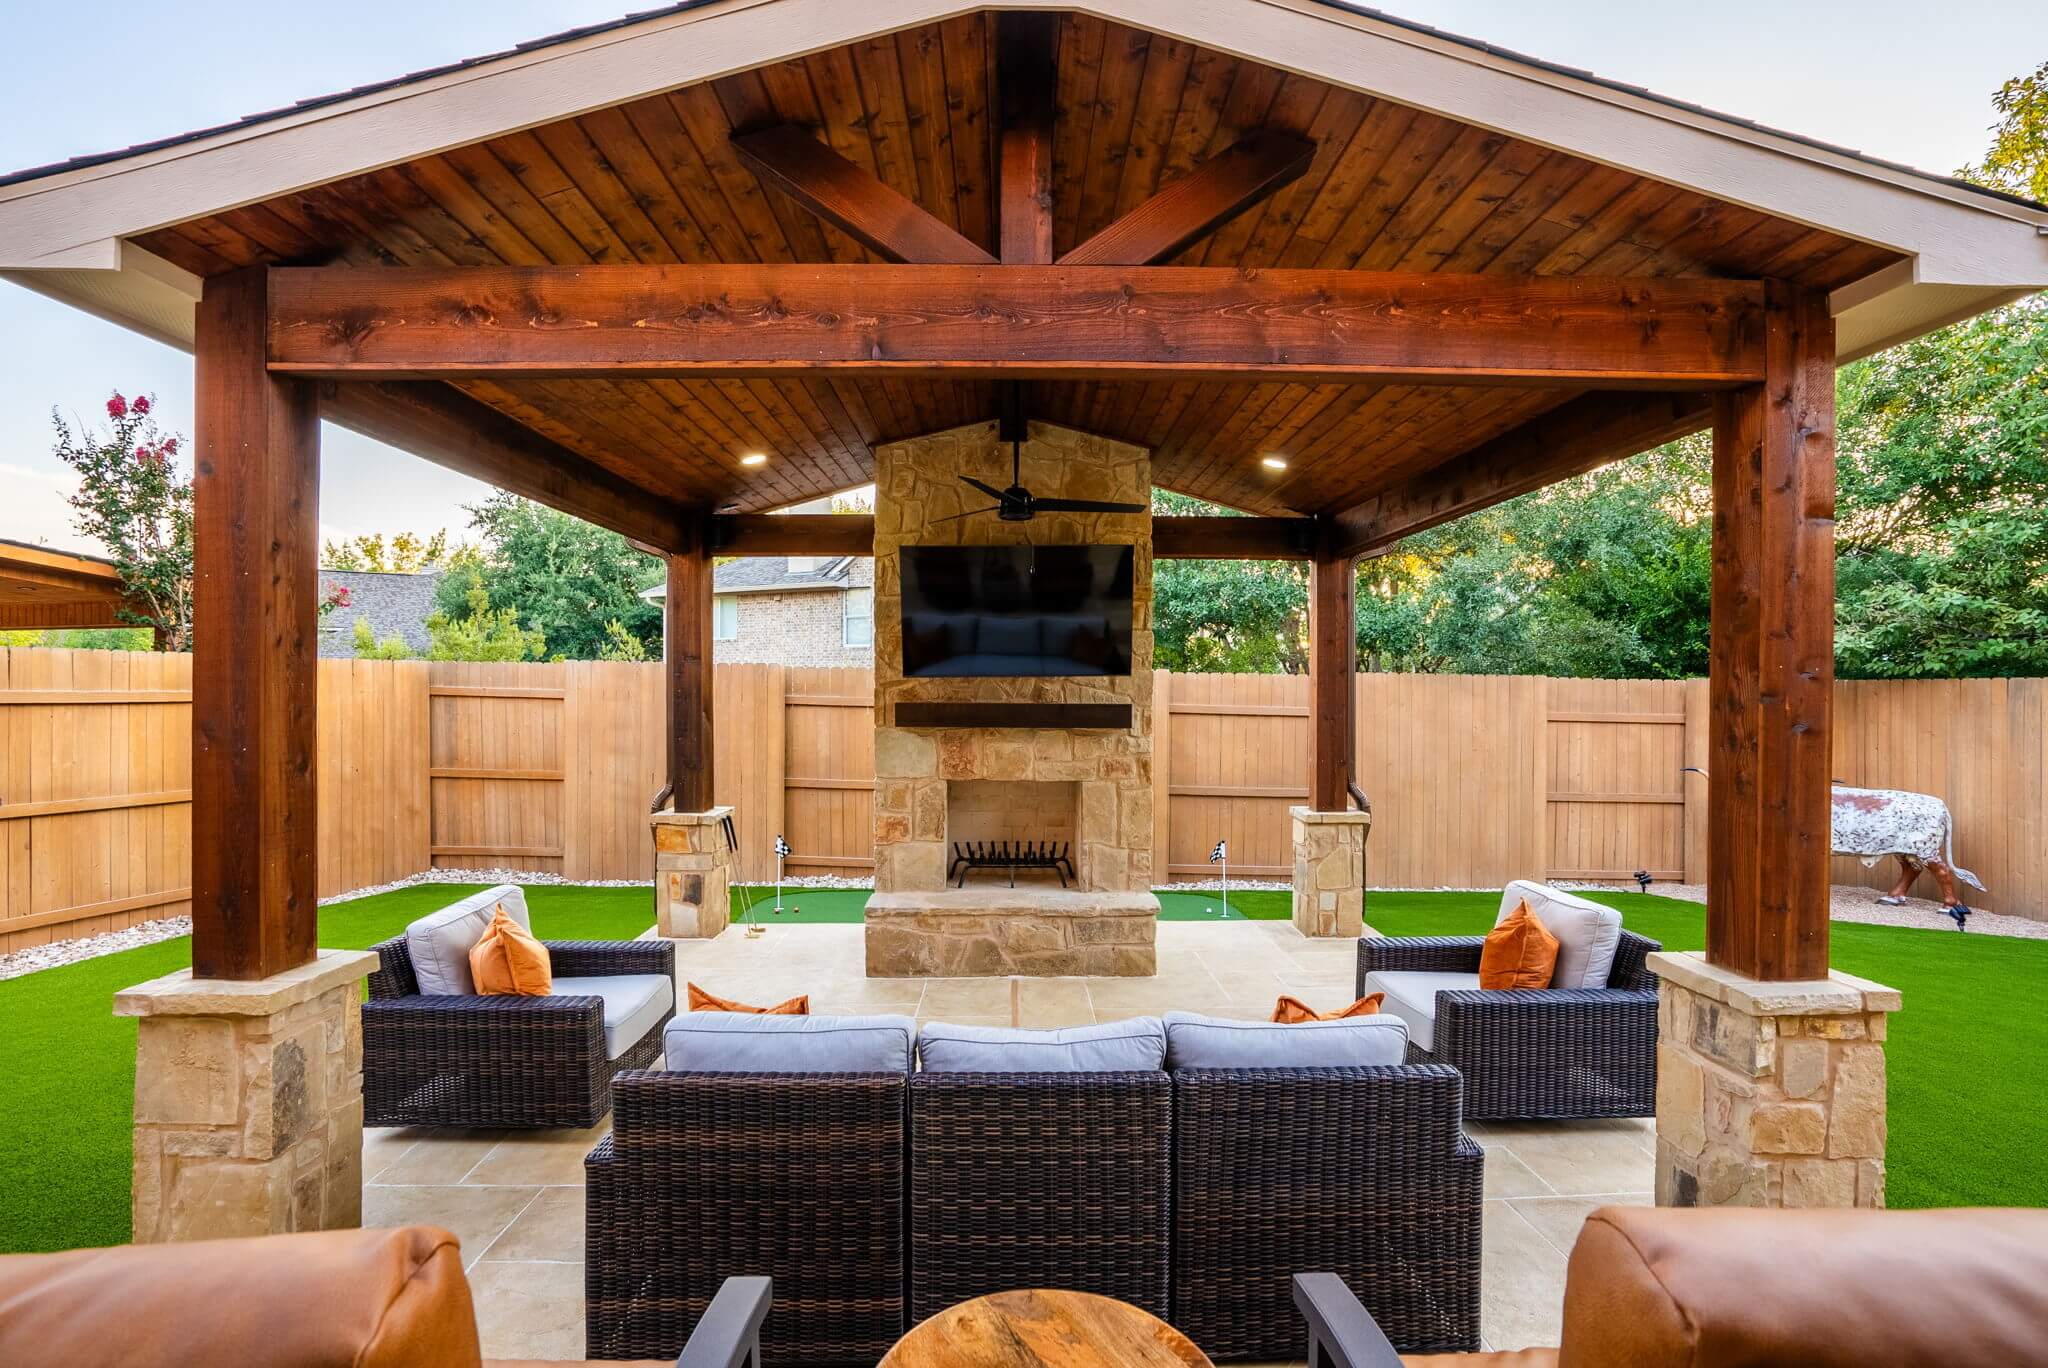 Backyard fireplace cozy outdoor living room covered patio